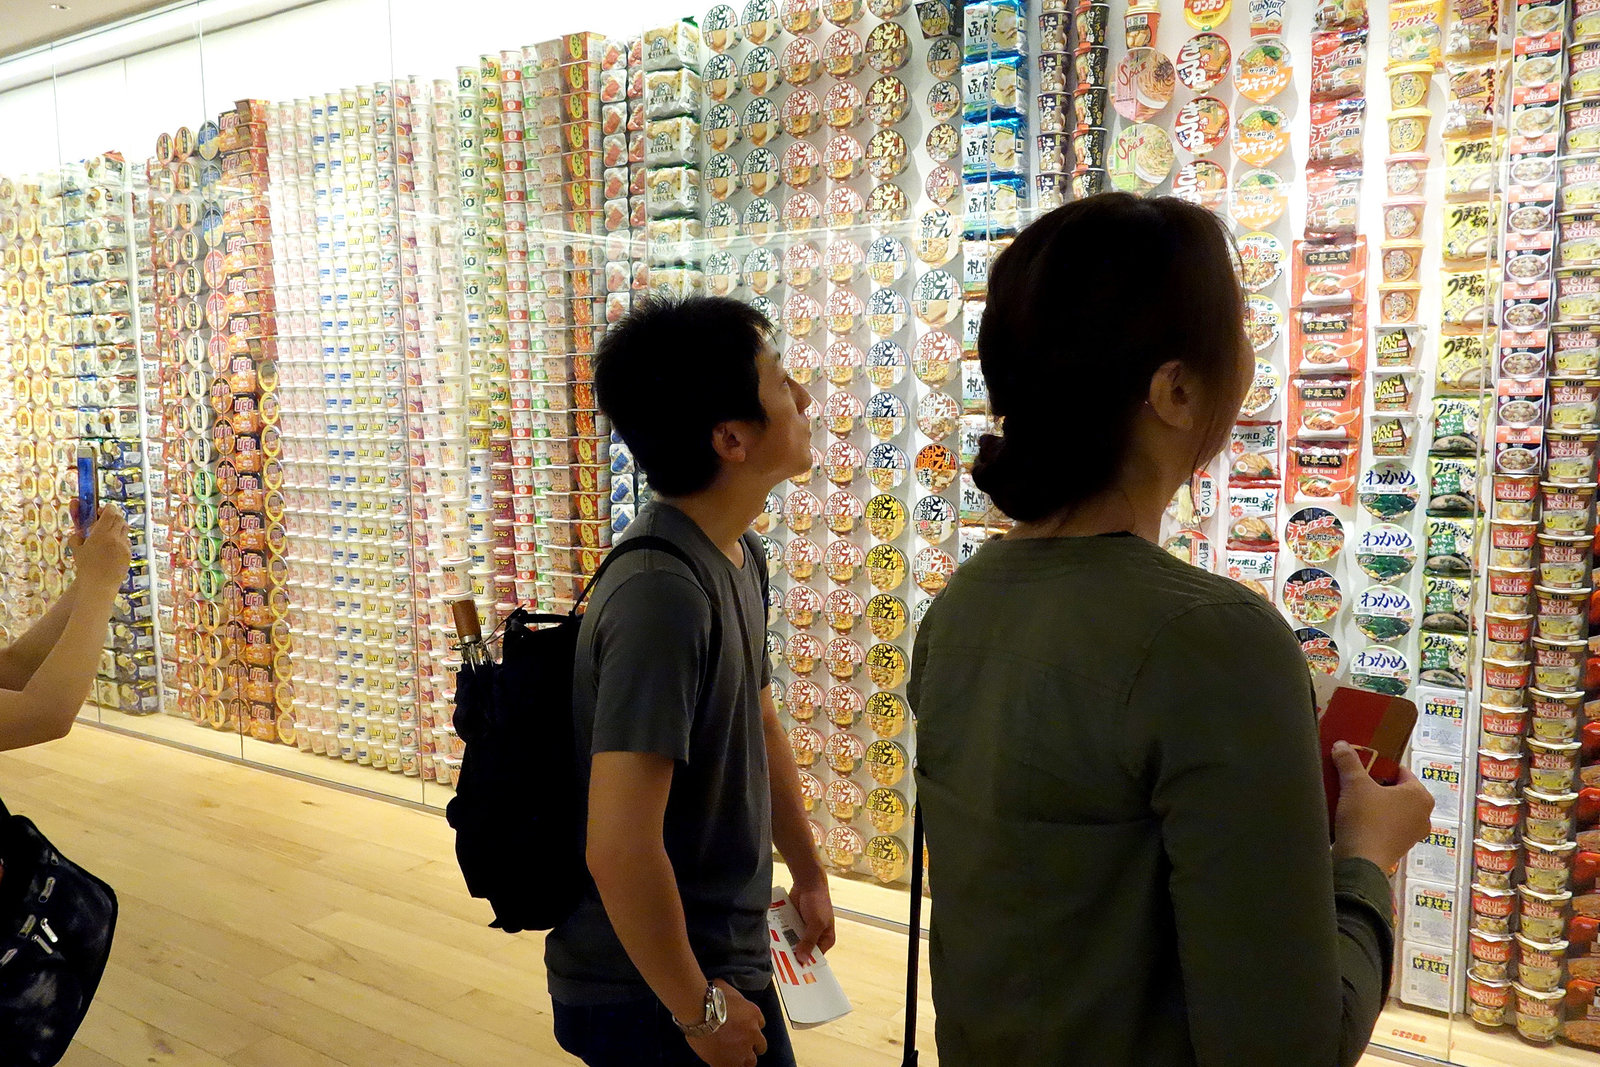 Visitors view a display of Cup Noodles packages from around the world.